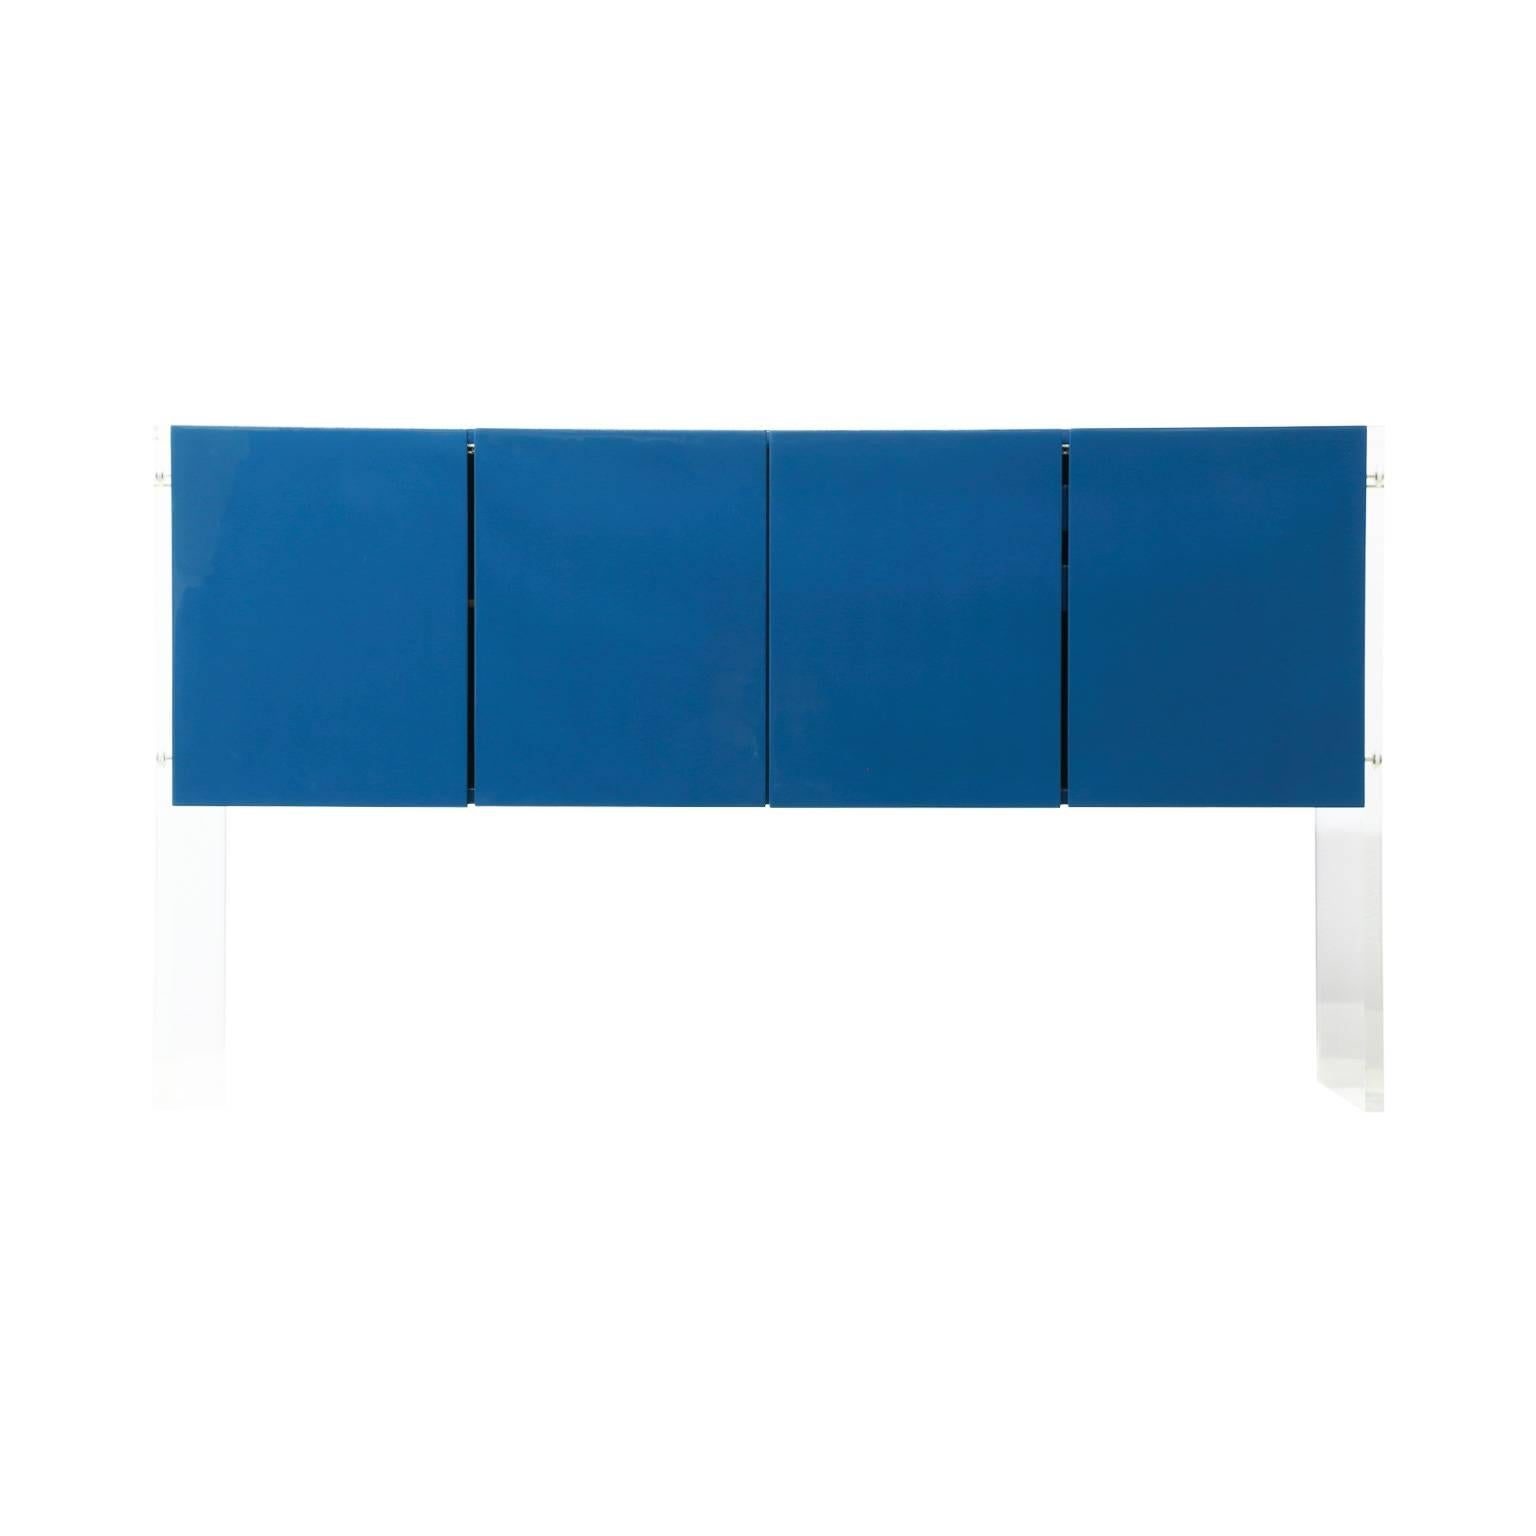 Designer: Milo Baughman.
Manufacturer: Thayer Coggin.
Period/Style: Mid-Century Modern.
Country: United States.
Date: 1970s.

Dimensions: 37″ H x 64.5″ L x 16″ W.
Materials: Lacquered wood, Lucite.
Condition: Excellent, newly